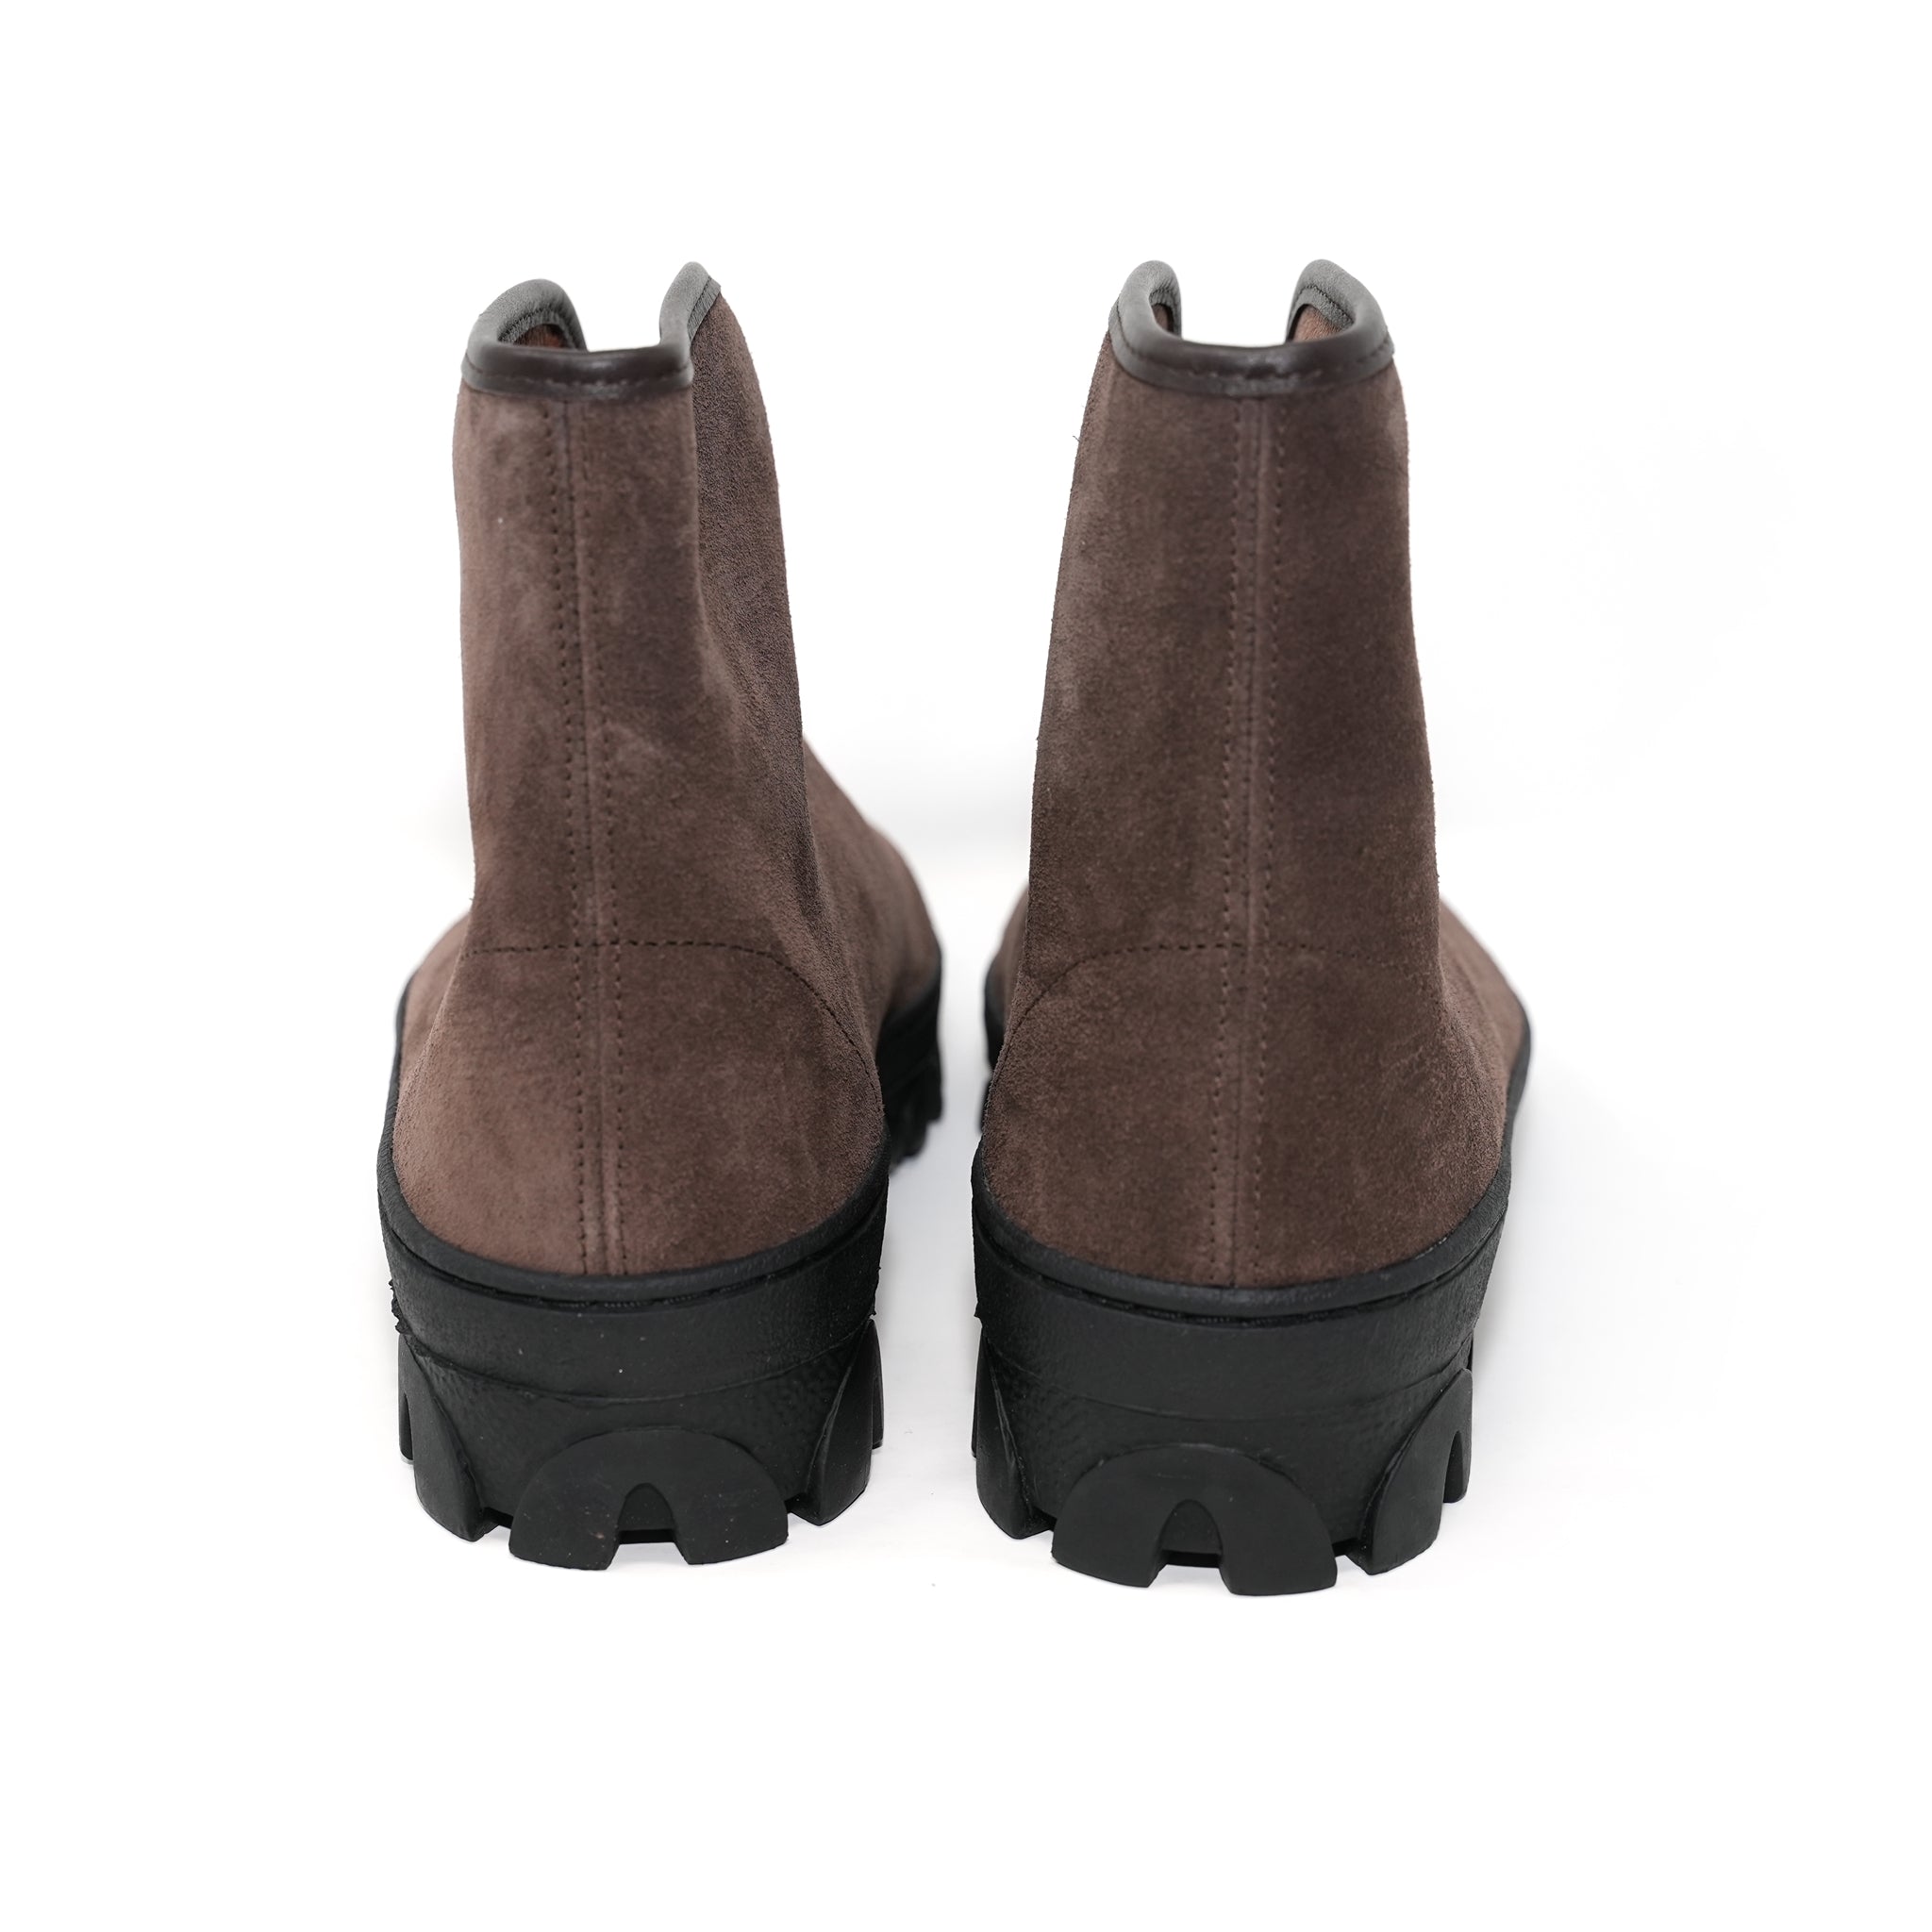 No:540SSA | Name:RUSSIAN MILITARY BOOTS | Color:Dark Brown Suede【REPRODUCTION OF FOUND_リプロダクションオブファウンド】